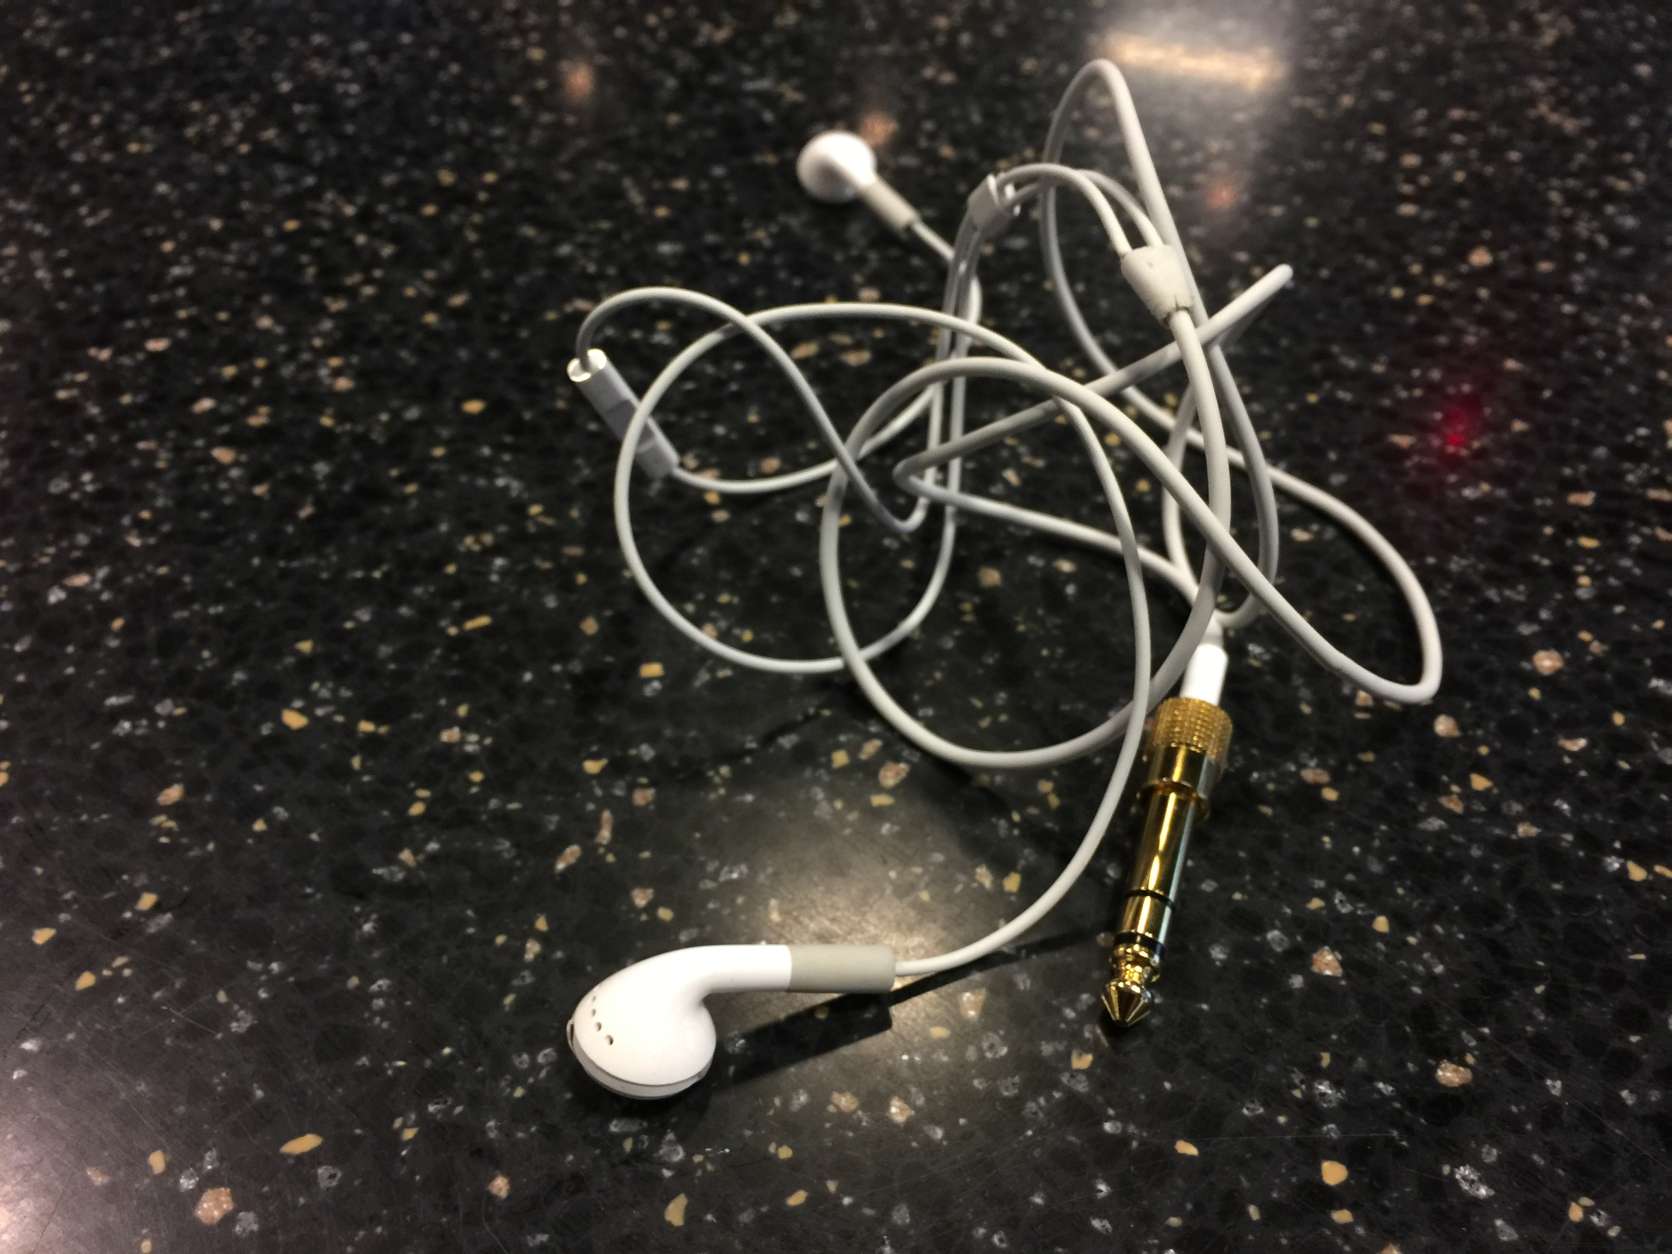 The volume on some ear buds can be dialed up to 120 decibels. Fewer than 30 minutes of exposure to 110 decibels can cause permanent damage to your inner ear, said Dr. Selena Heman-Ackah of MedStar Washington Hospital. (WTOP/Kristi King)